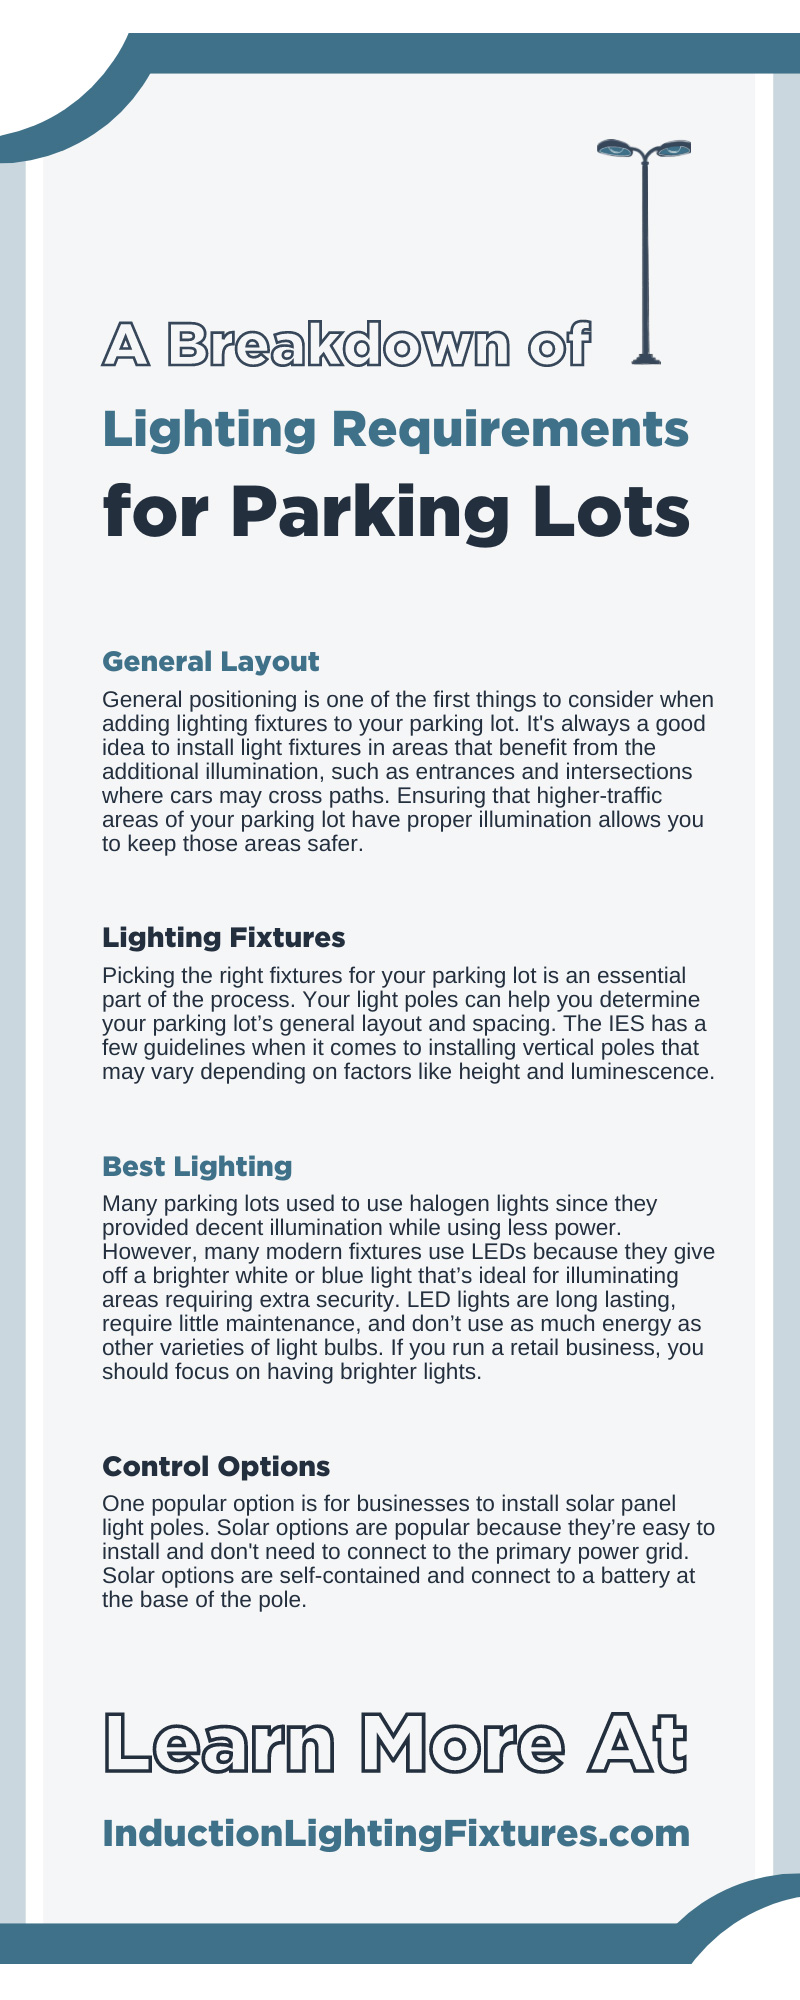 A Breakdown of Lighting Requirements for Parking Lots